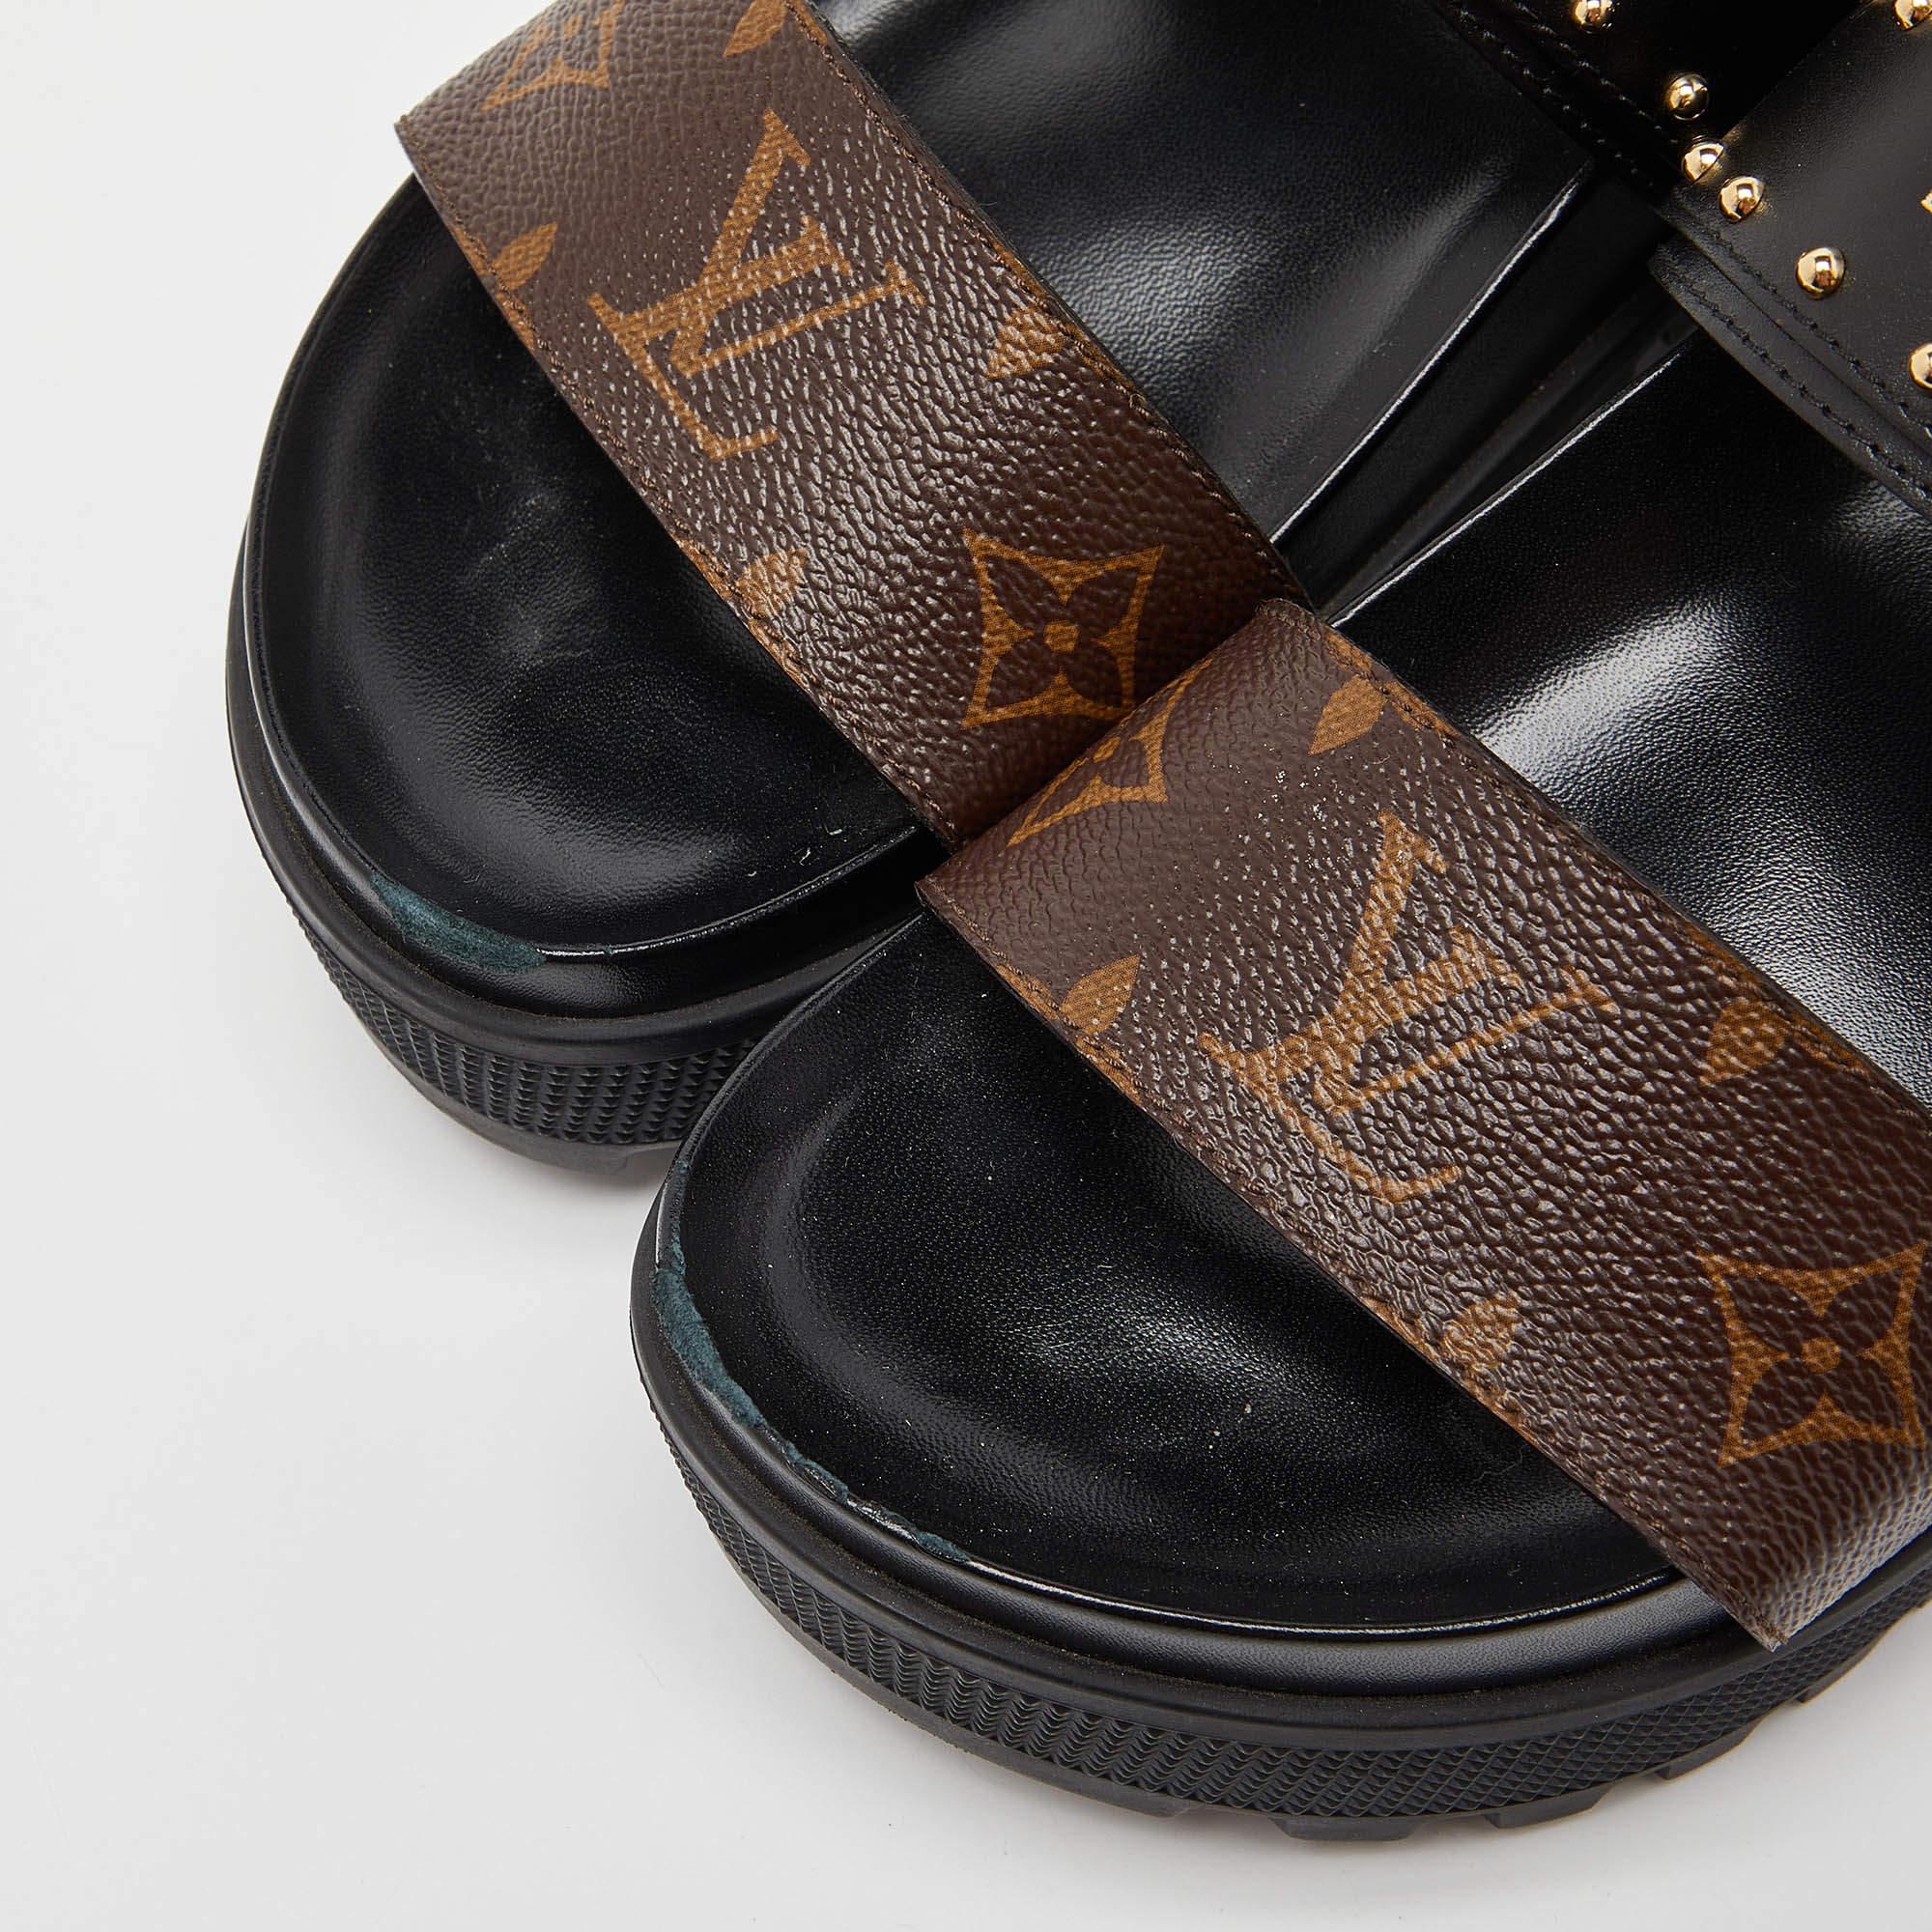 Louis Vuitton Rubber Sandals - 7 For Sale on 1stDibs